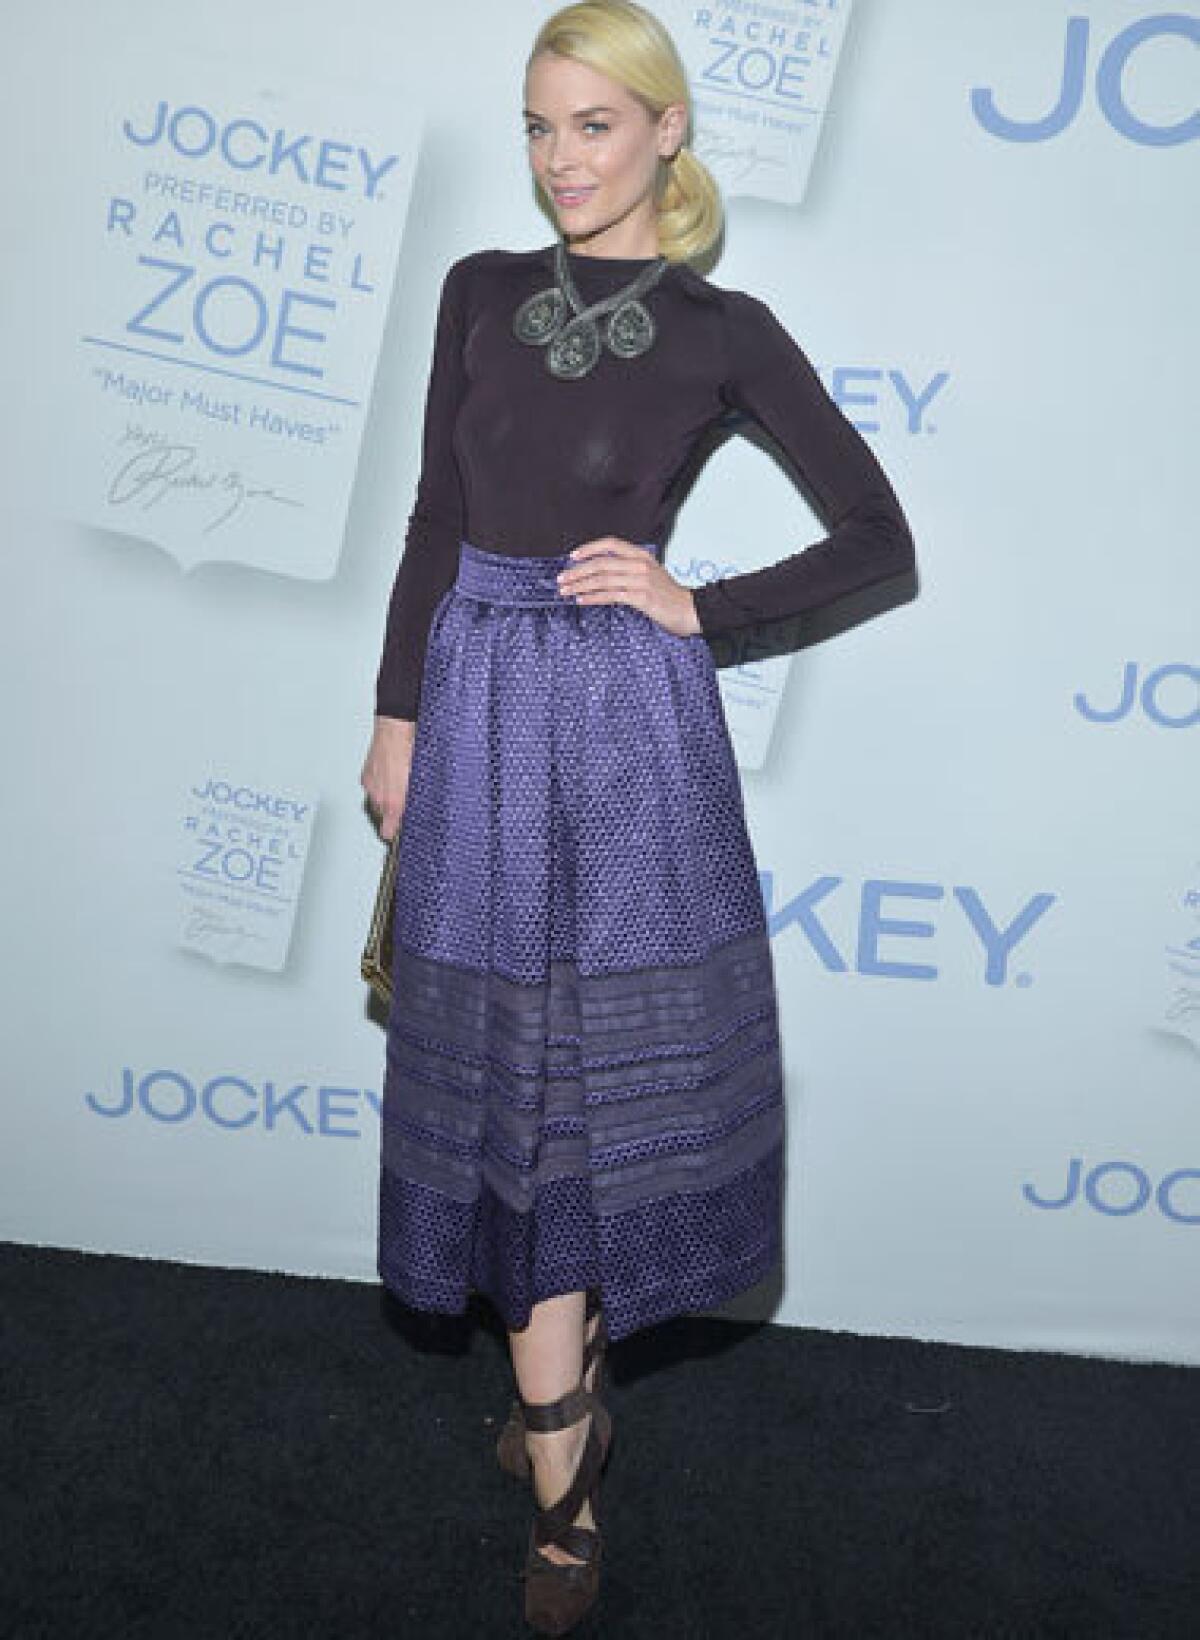 Actress Jaime King celebrates the launch of Rachel Zoe's "Major Must Haves" from Jockey at Sunset Tower on Oct. 17 in West Hollywood.